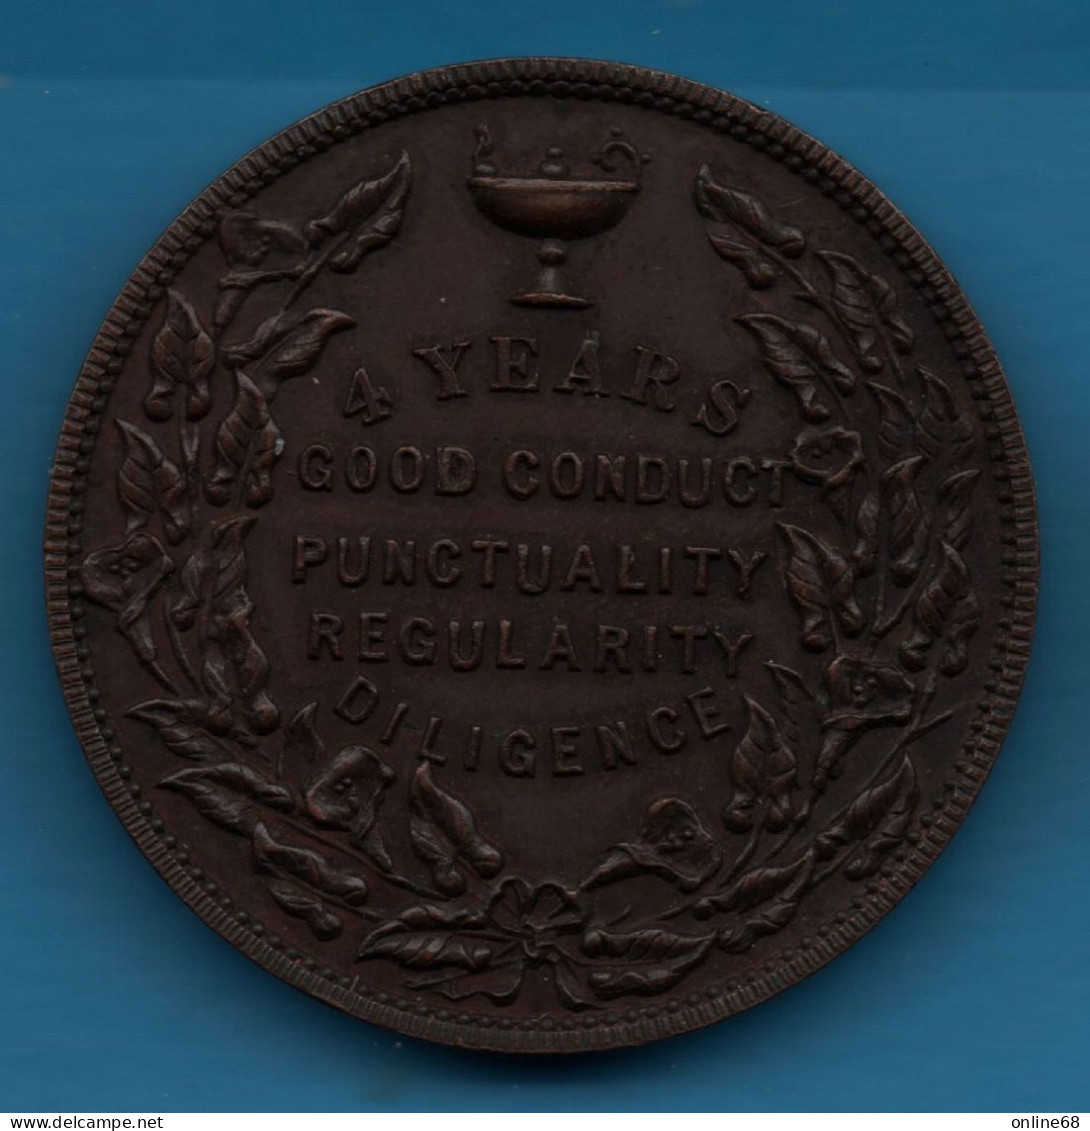 CANADA TORONTO PUBLIC SCHOOL BOARD 4 YEARS GOOD CONDUCT PUNCTUALITY REGULARITY DILIGENCE 1889 School Medal - Professionals / Firms